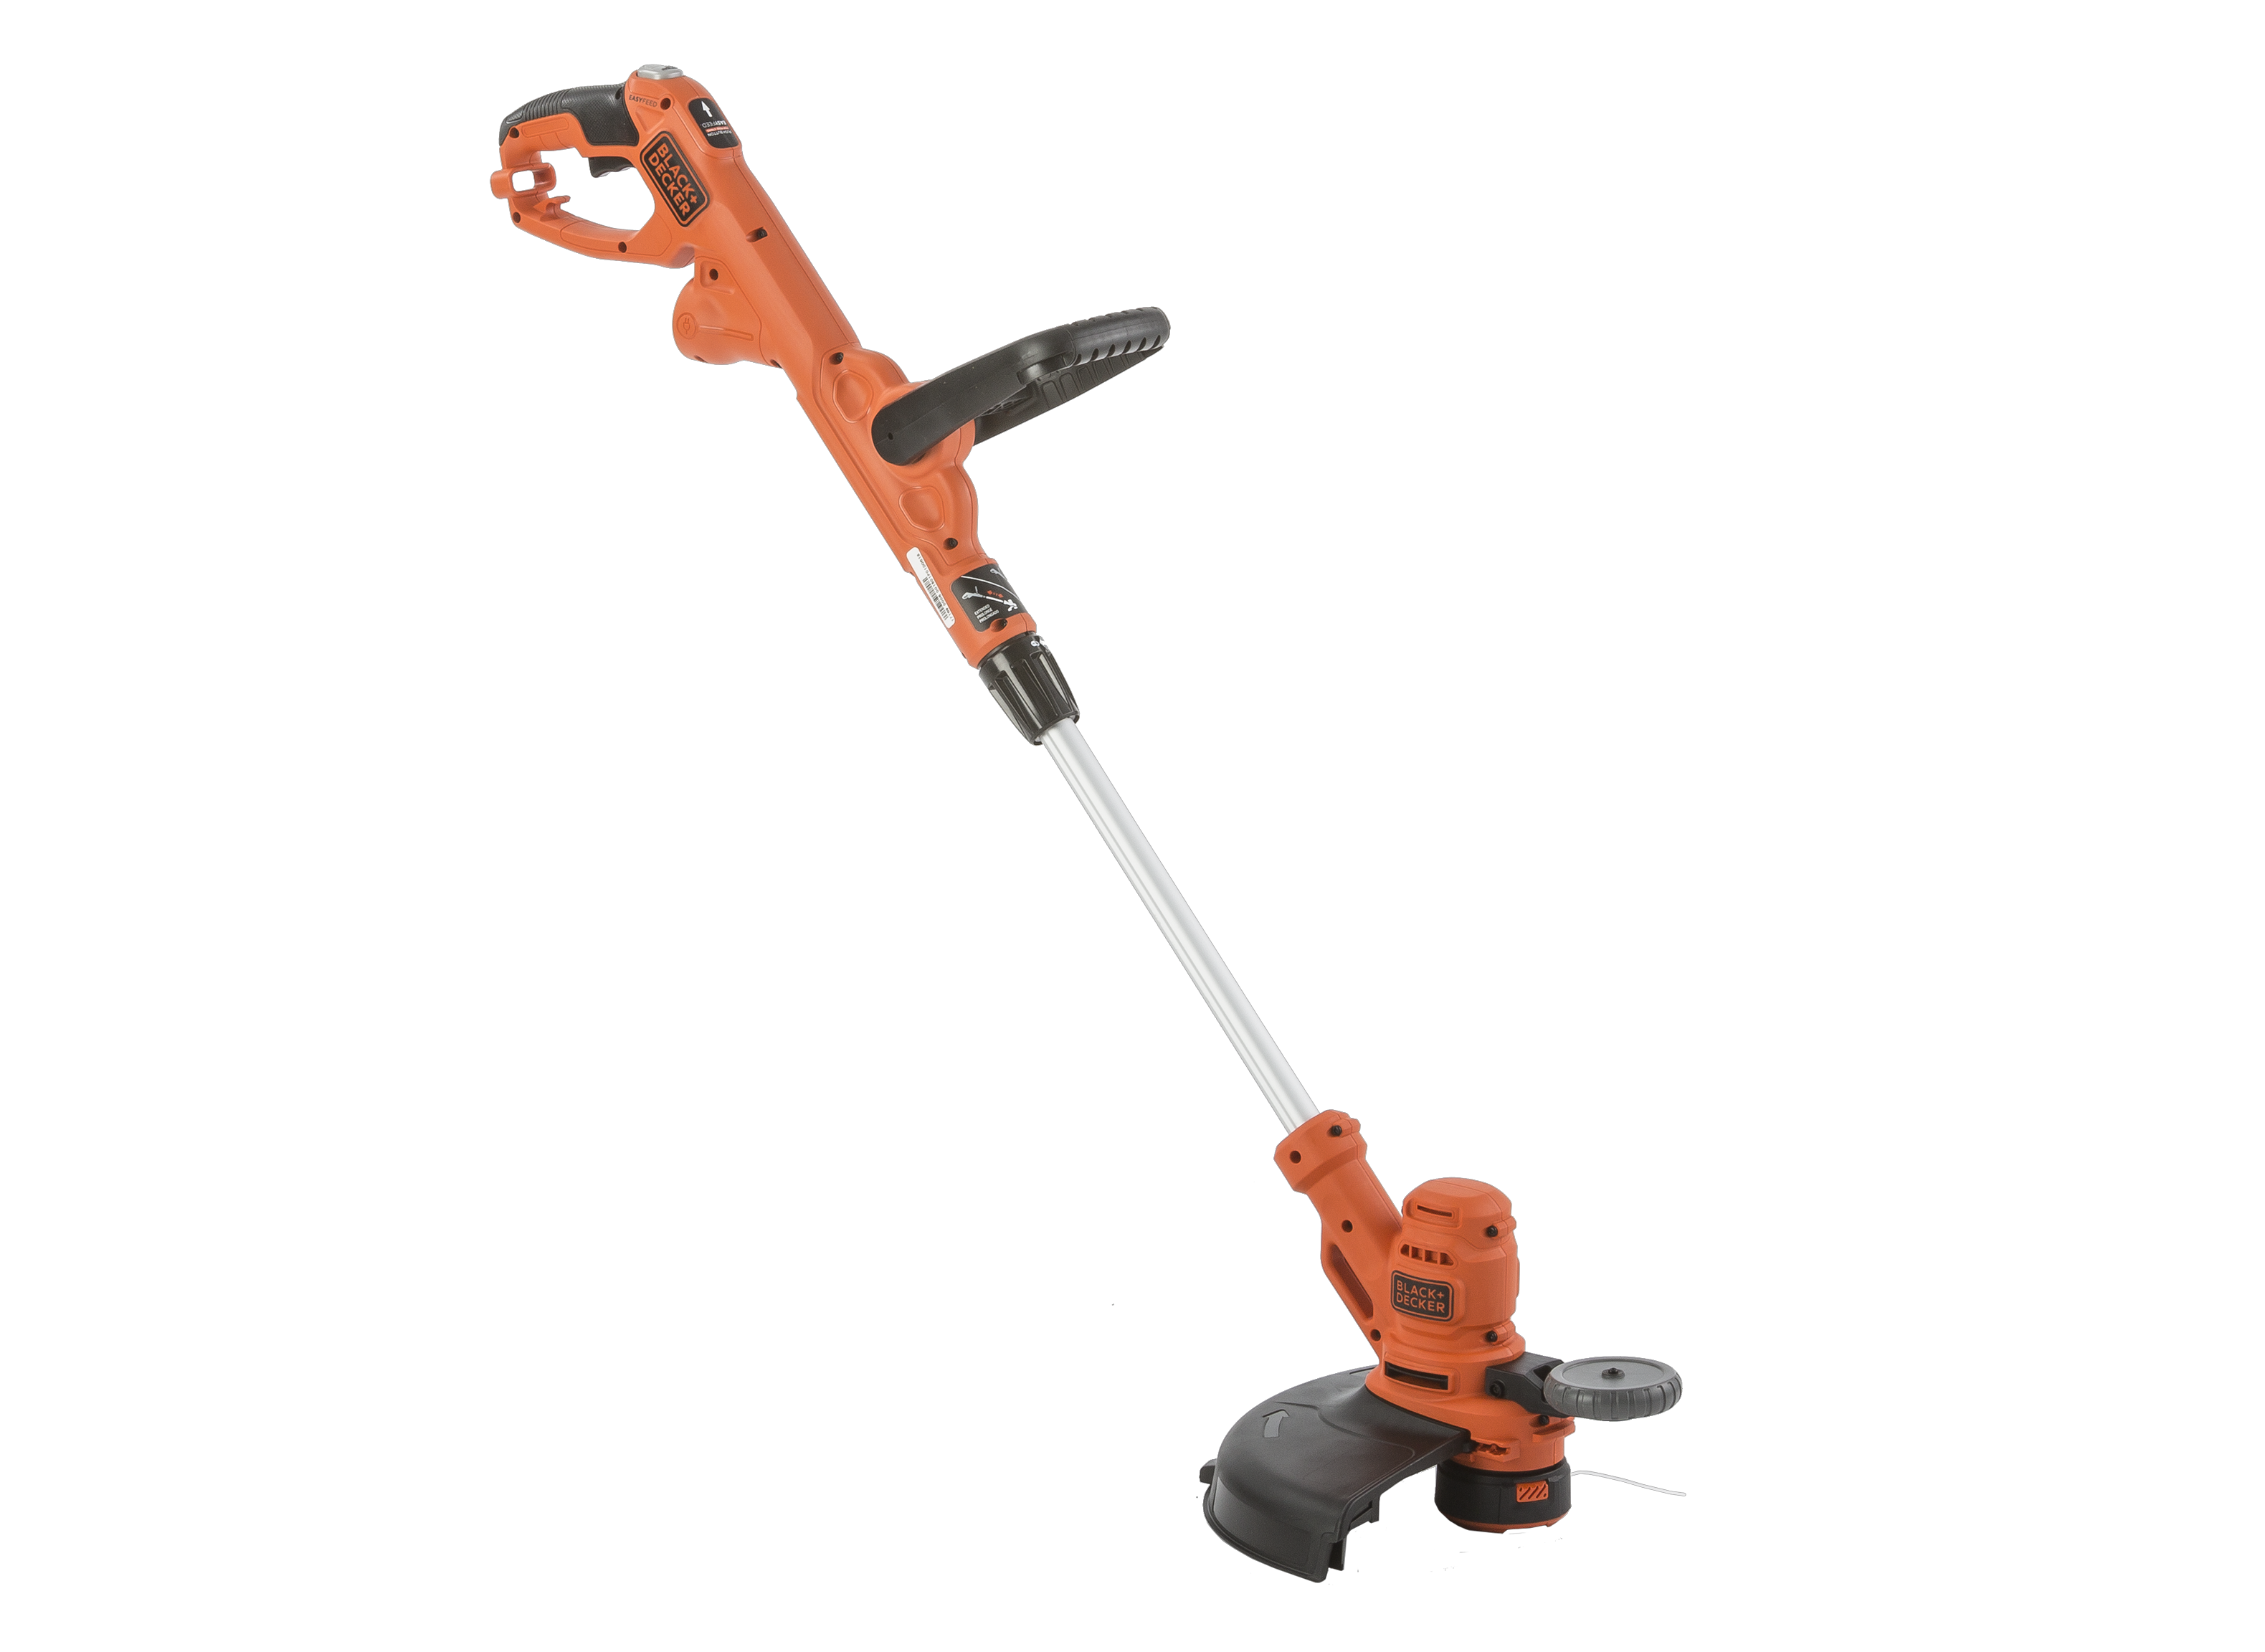 https://crdms.images.consumerreports.org/prod/products/cr/models/395789-string-trimmers-black-decker-beste620-61720.png